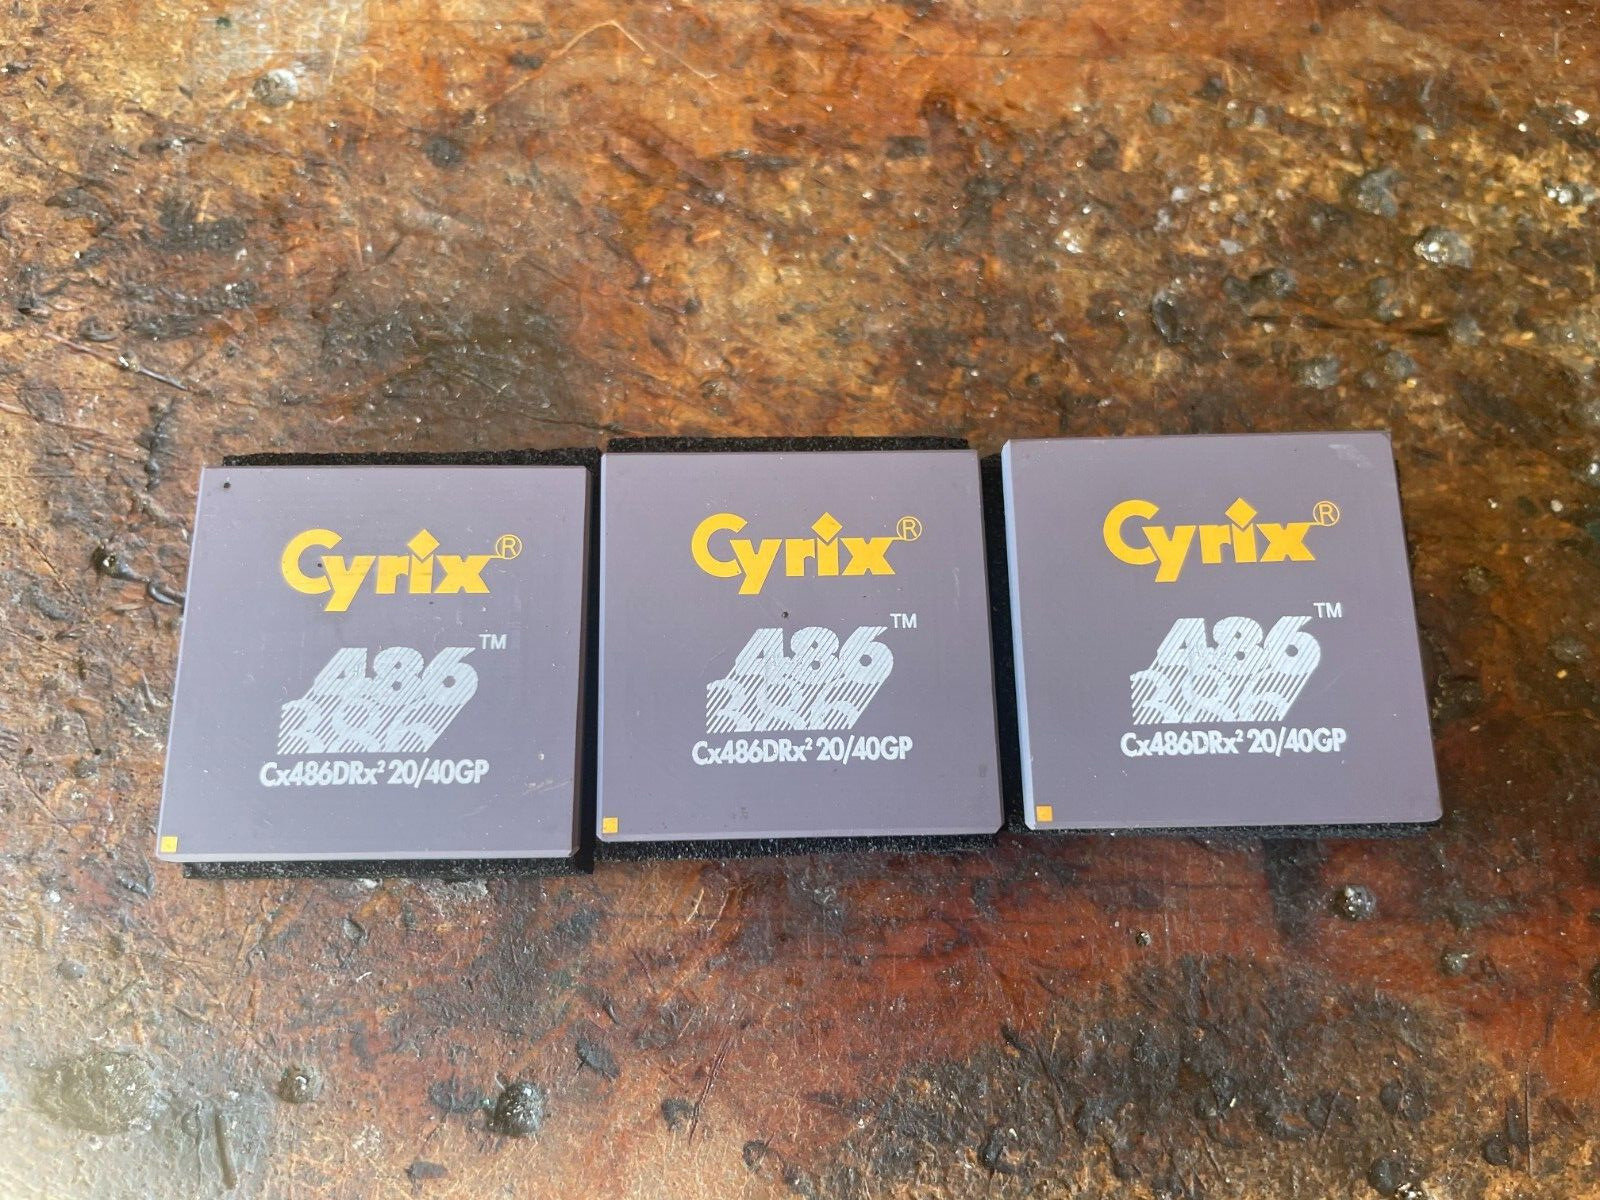 Cyrix CX486Drx2 386 to 486 CPU Accelerator 20/40GP 20/40 mhz PGA *Works Great*